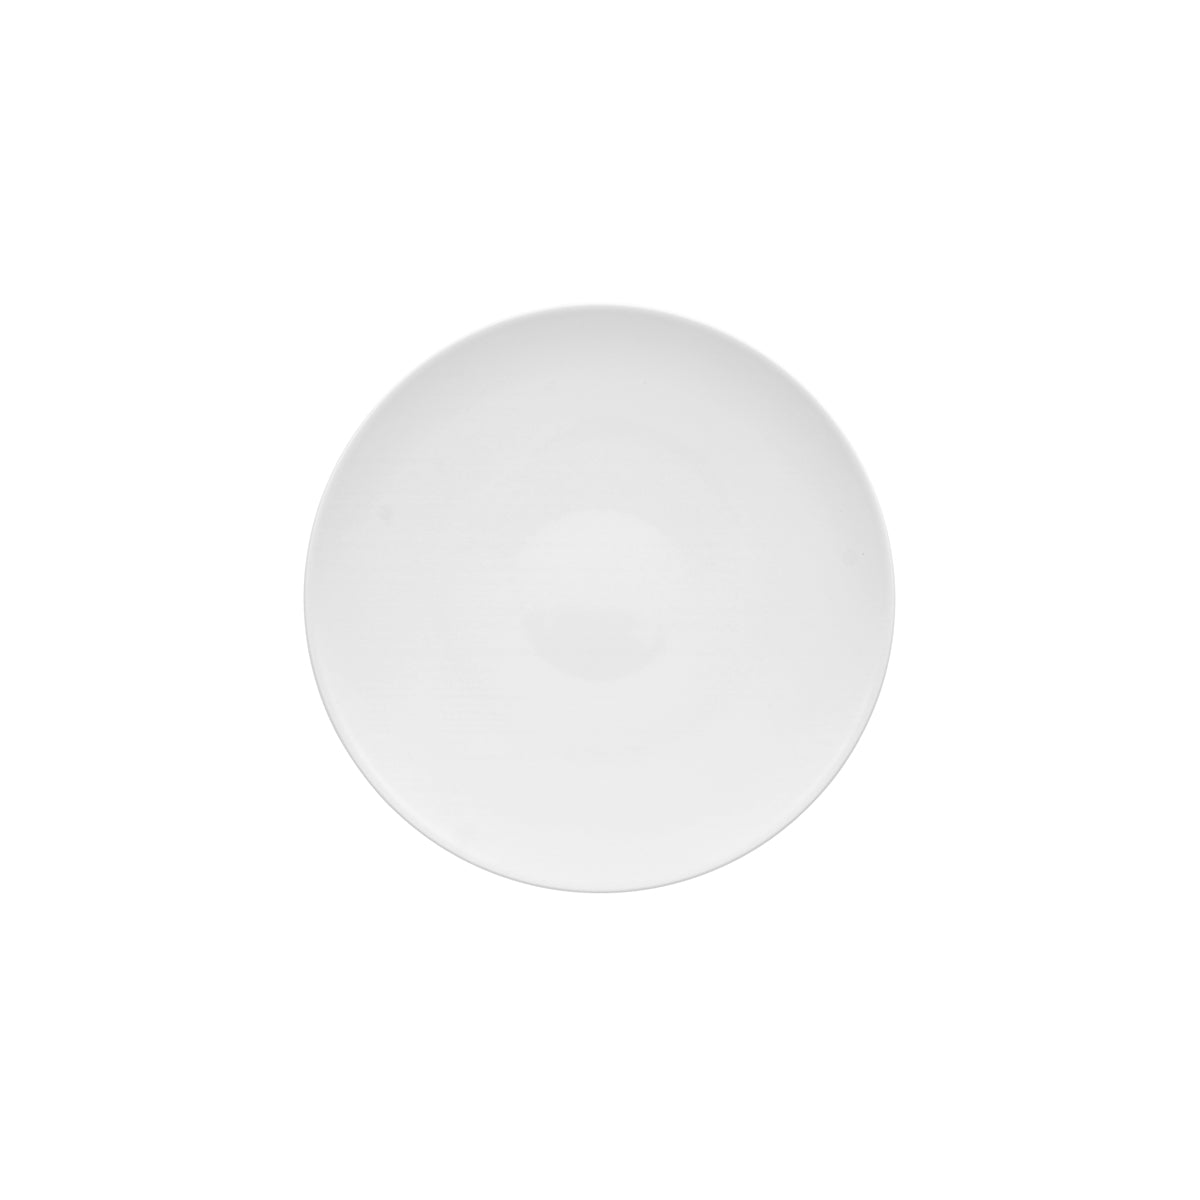 VB16-3272-2595 Villeroy And Boch Villeroy And Boch Stella Hotel White Coupe Plate 330mm Tomkin Australia Hospitality Supplies